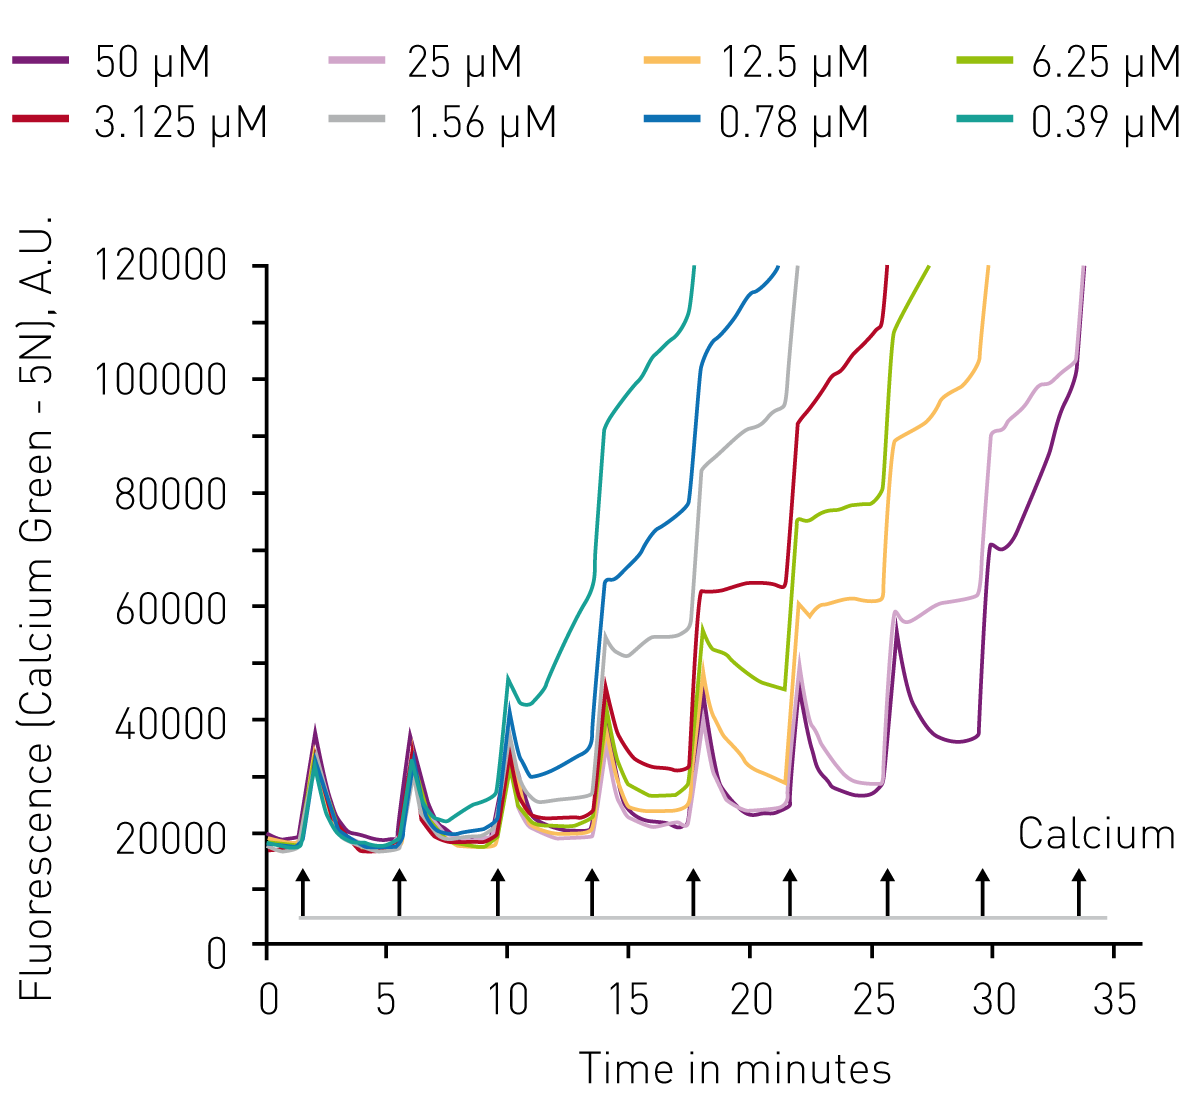 Fig. 2: Challenging isolated mitochondria with injections of CaCl2 leads to ﬂuorescent spikes until collapse of the mitochondrial permeability transition pore (MPTP) which is indicated by permanent high ﬂuorescence value. Time to maximum ﬂuorescence correlates with inhibition of MPTP.